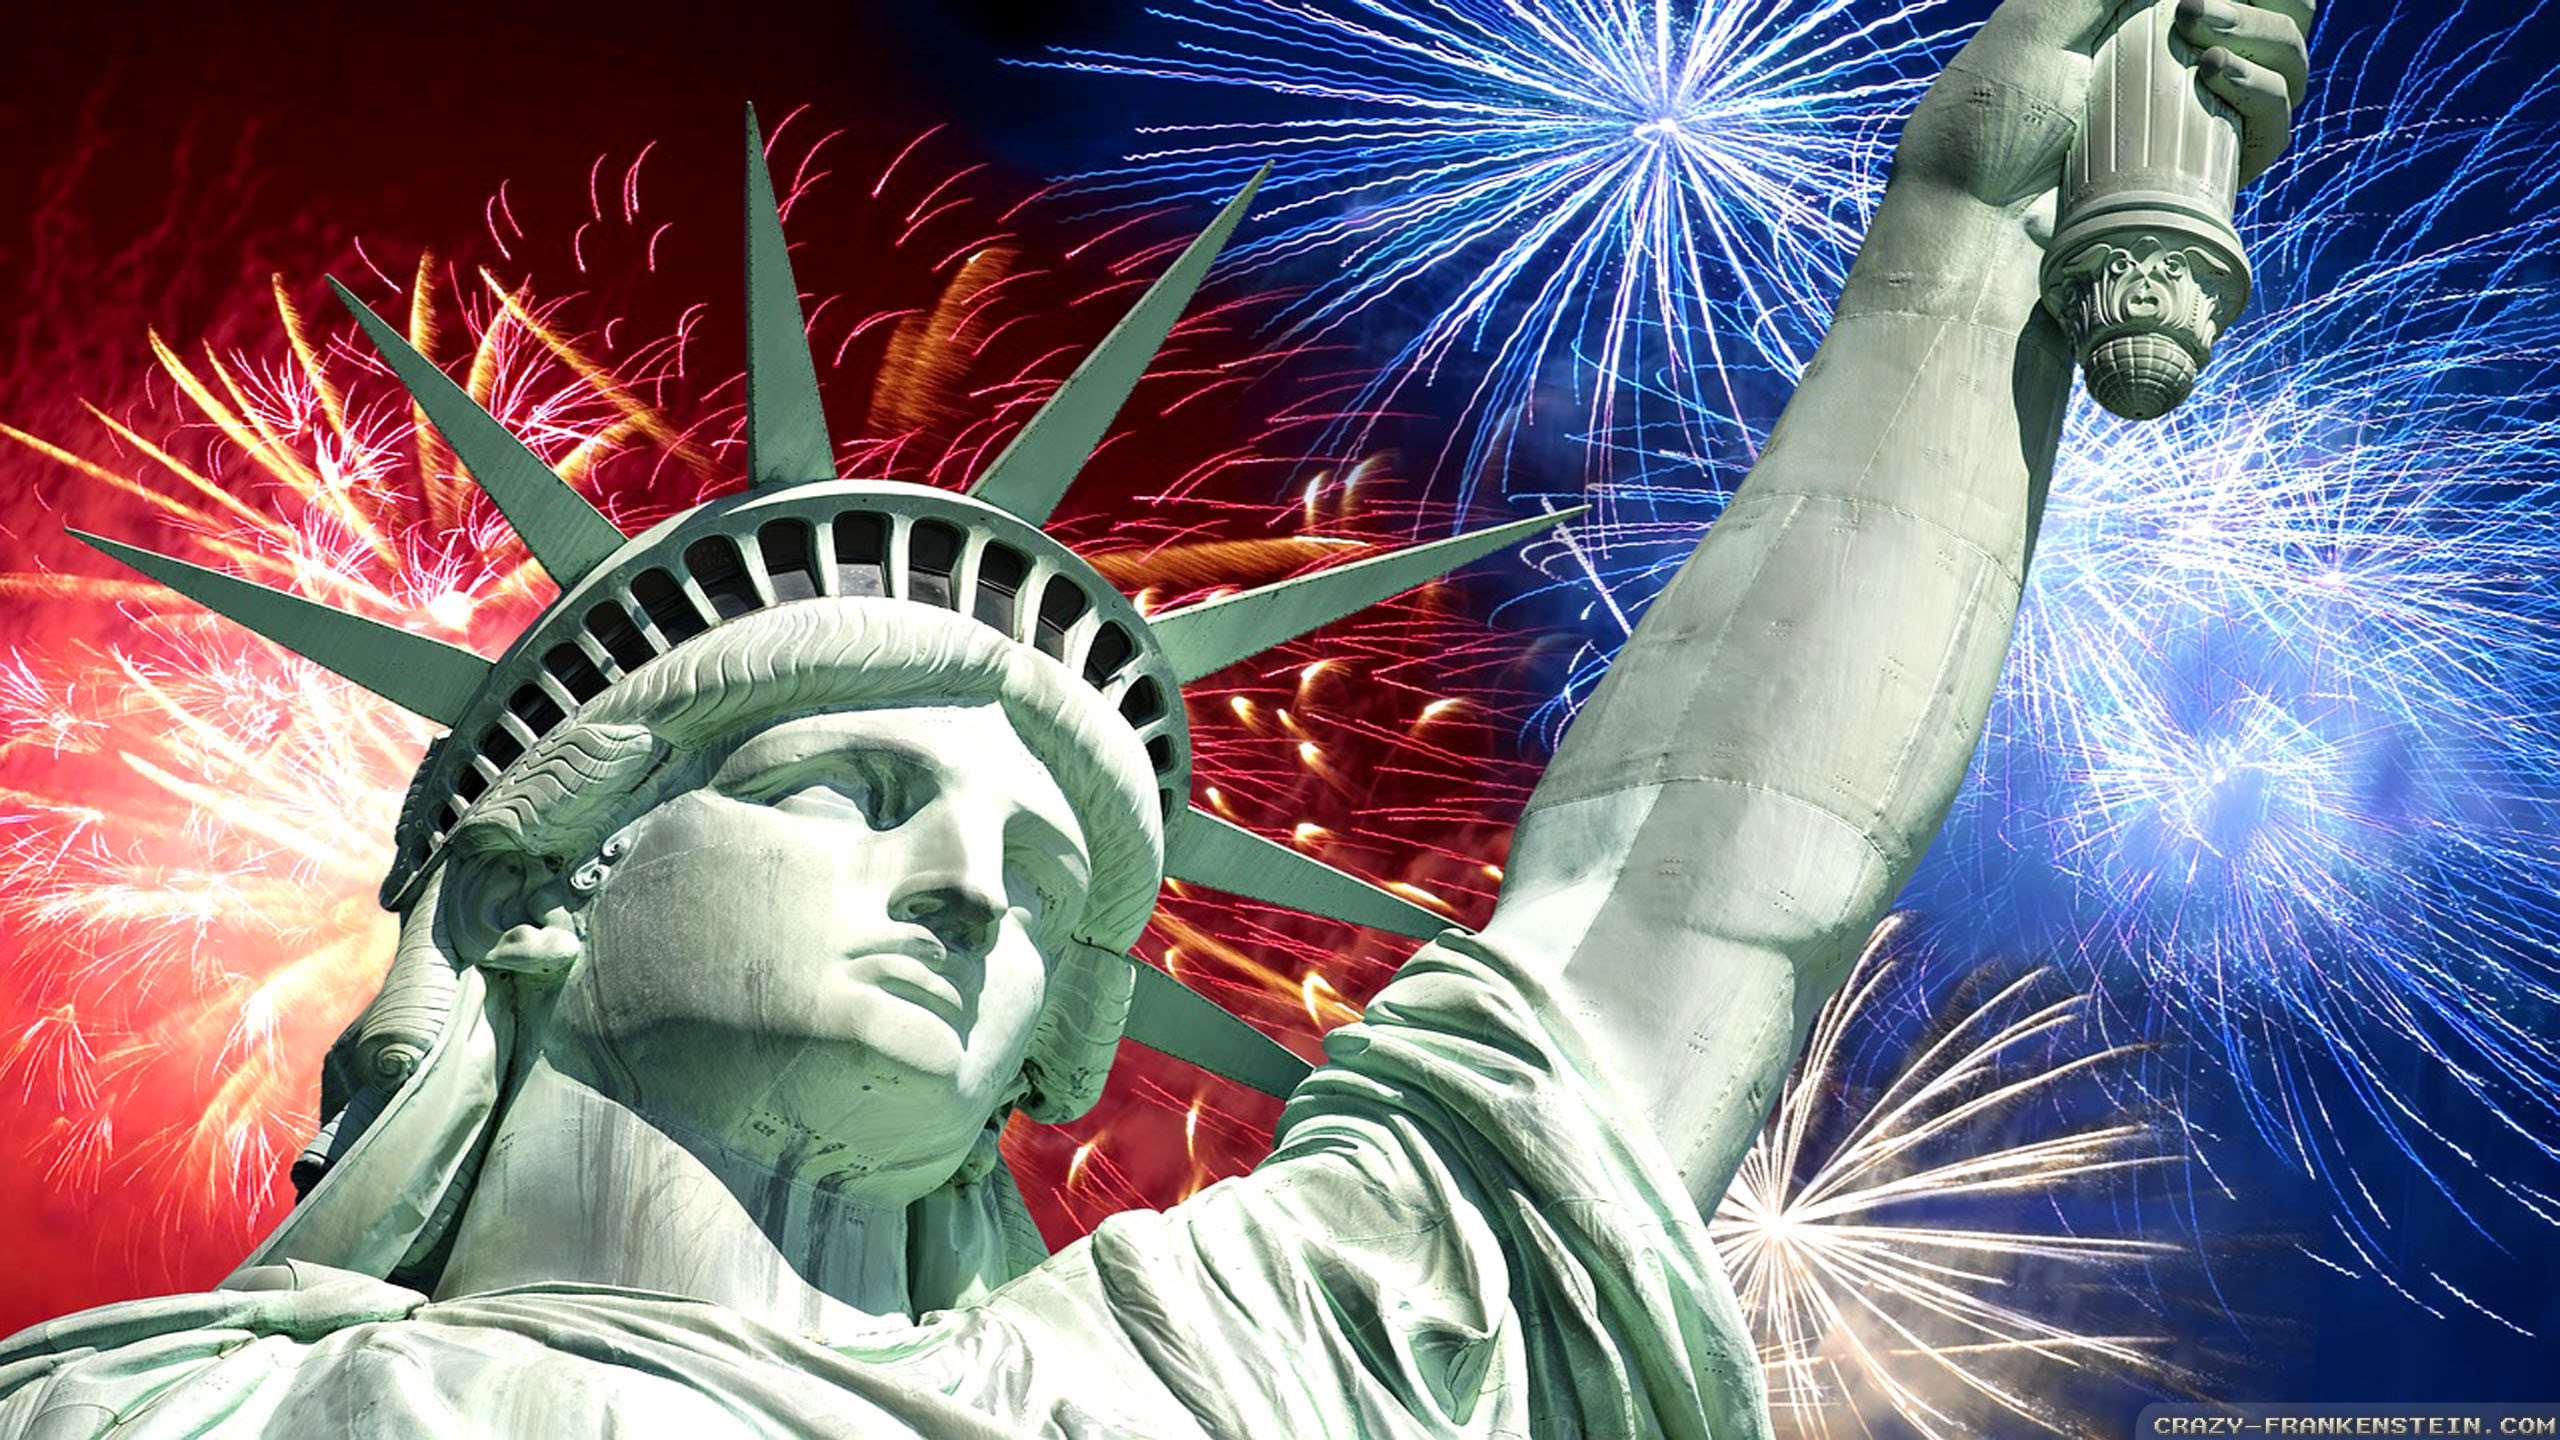 2560x1440 July 4th Fireworks wallpapers - Independence Day wallpapers - Crazy .